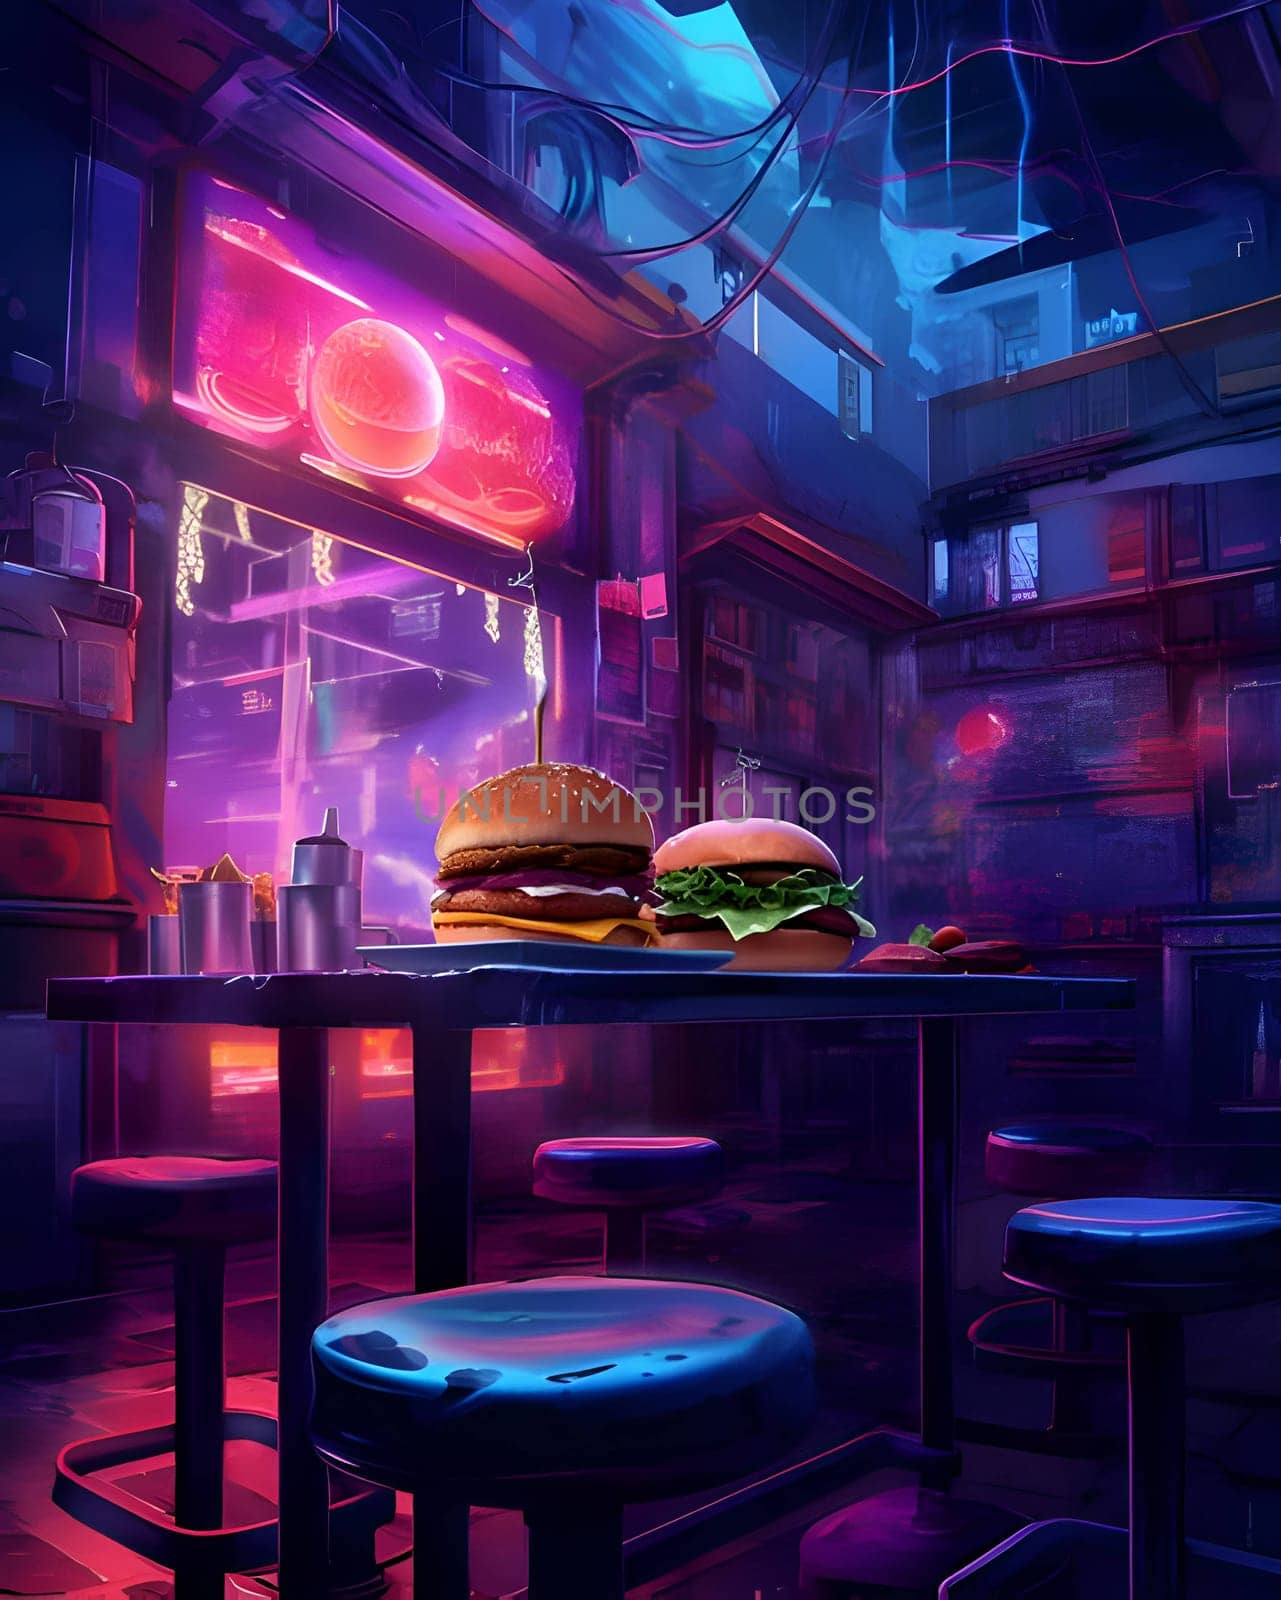 In a futuristic setting, two delectable hamburgers are showcased on a stylish restaurant table.